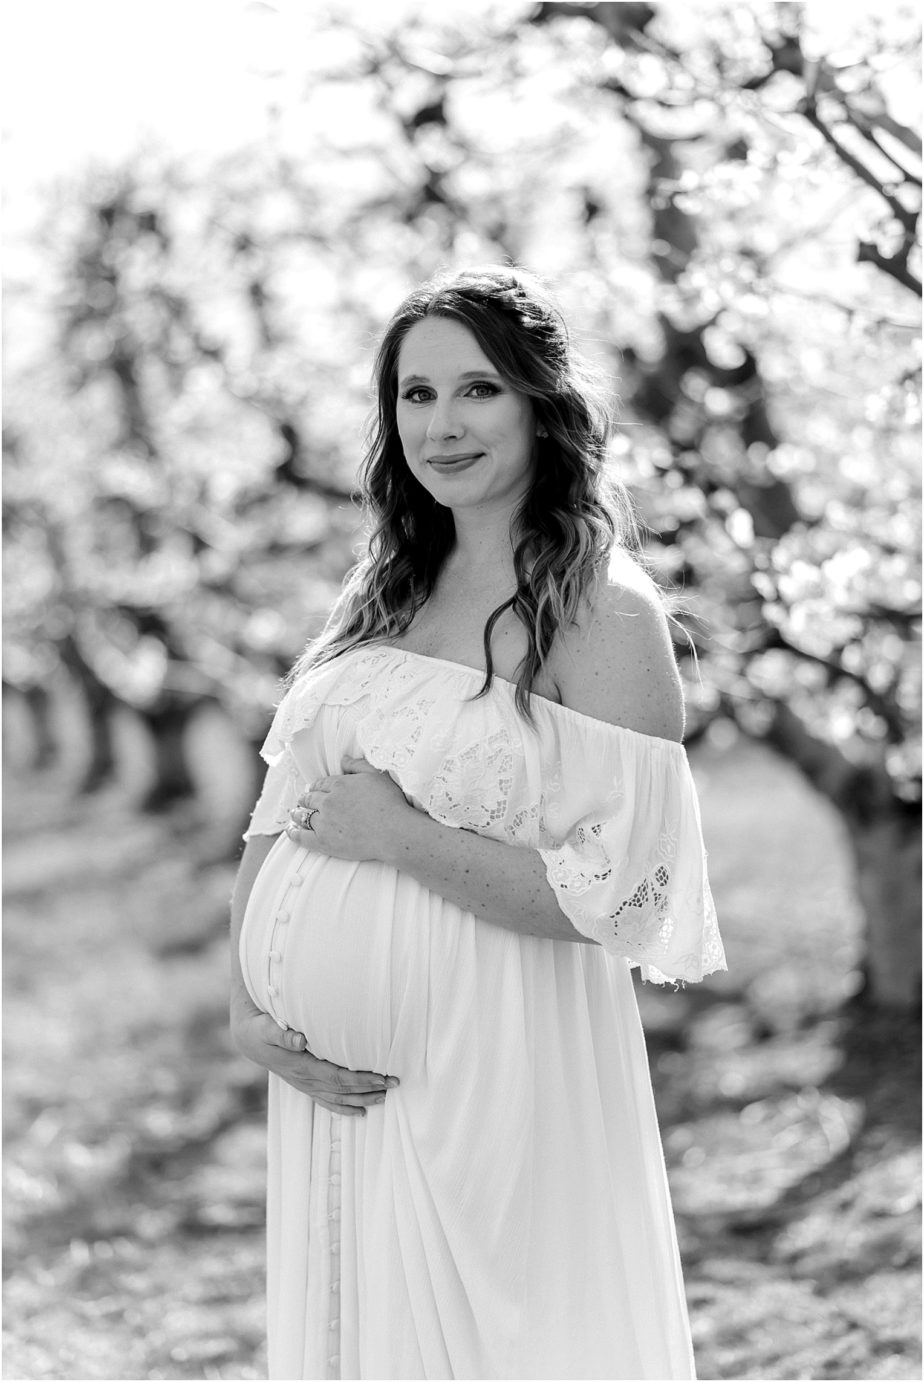 County Maternity Session couple posing in cherry blossoms orchard